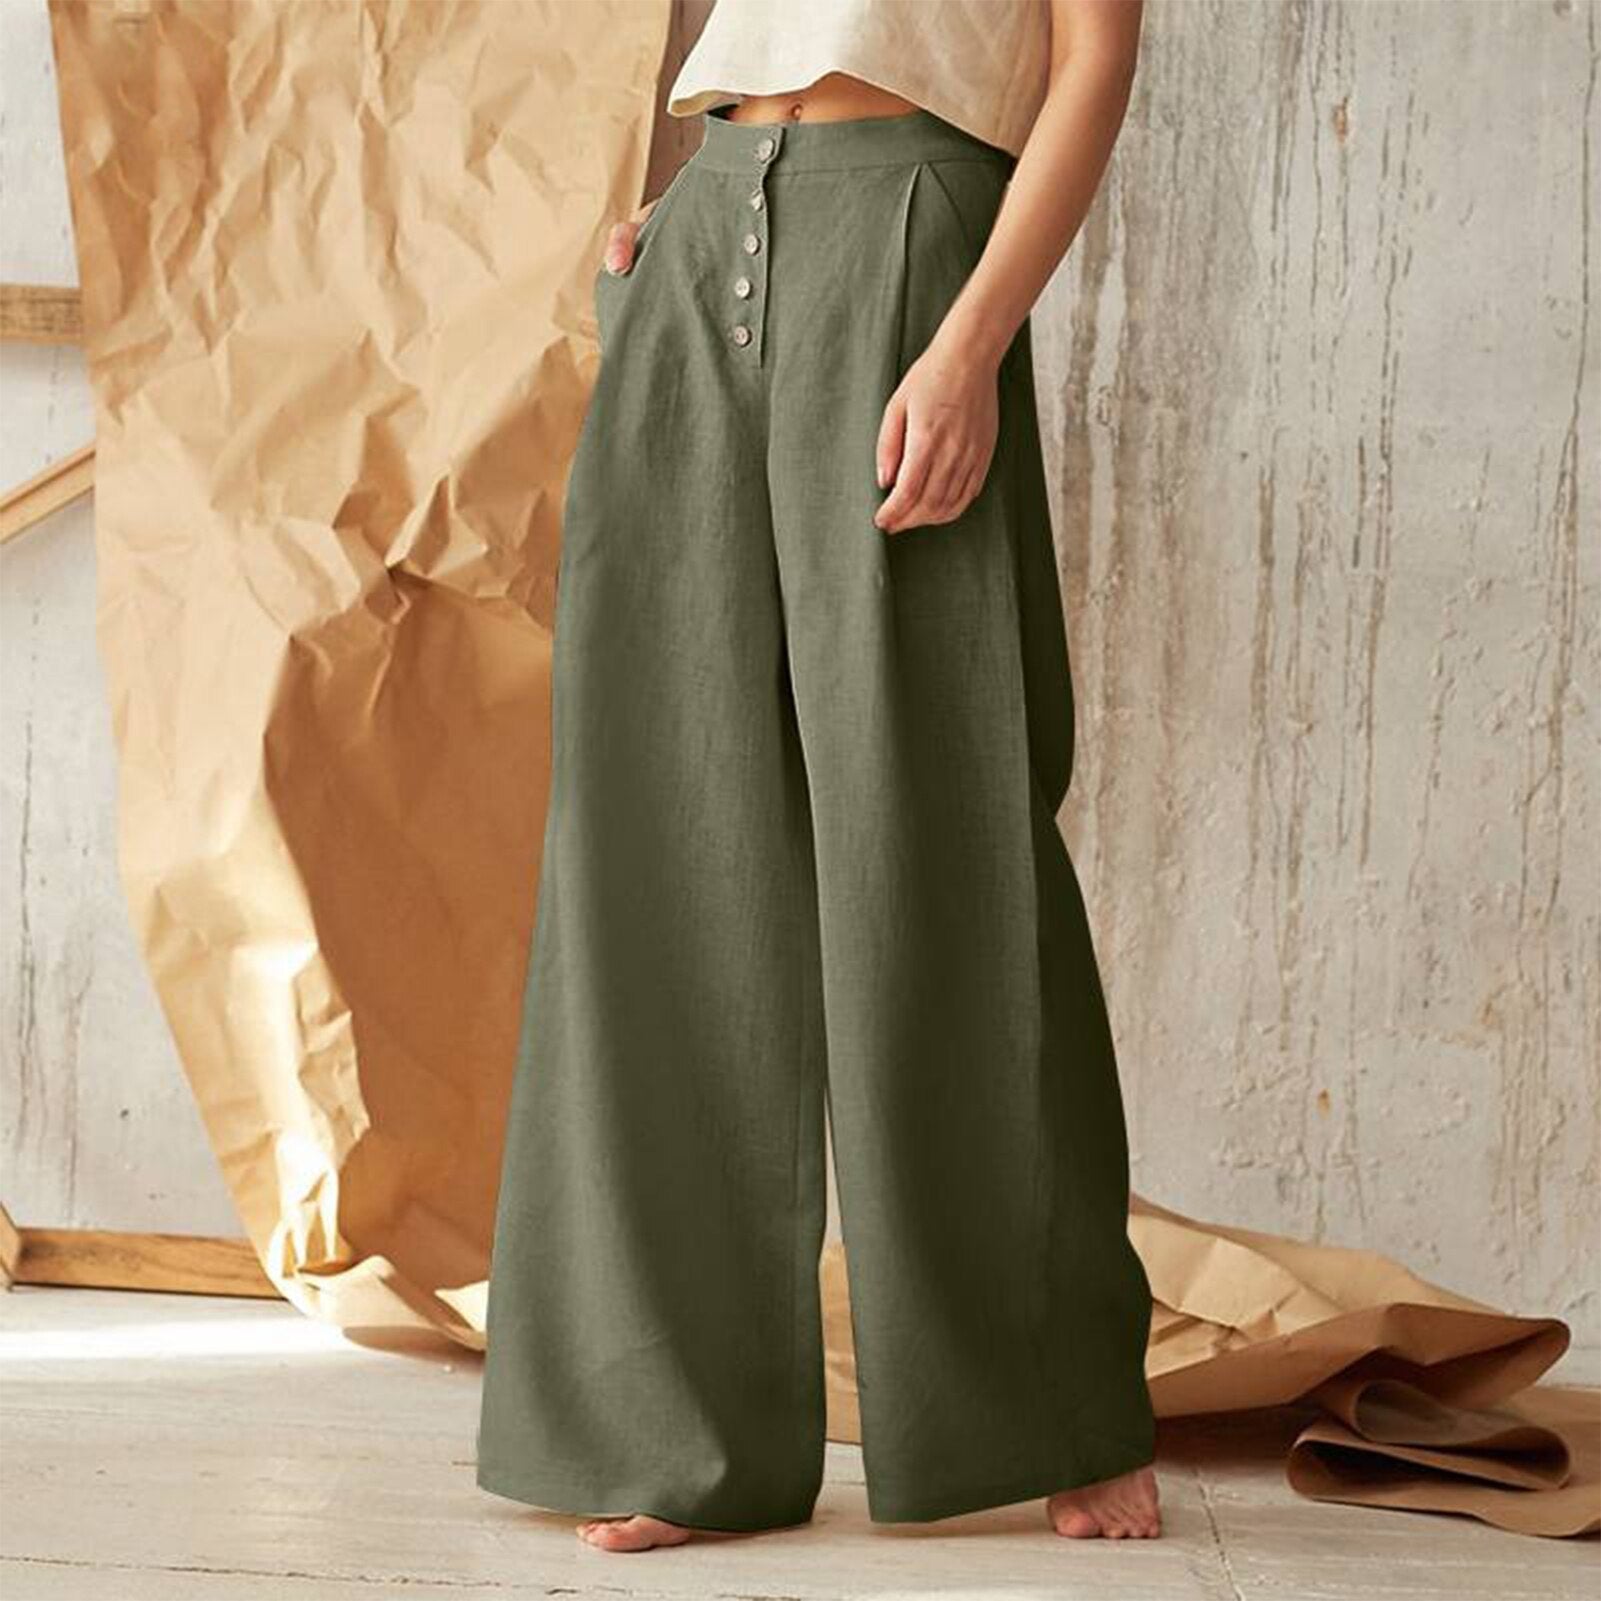 Back to School Women Solid Sweatpants Casual Cotton Ladies Trousers High Waist Fashion Simple with Pockets Buttons Loose Pantalones